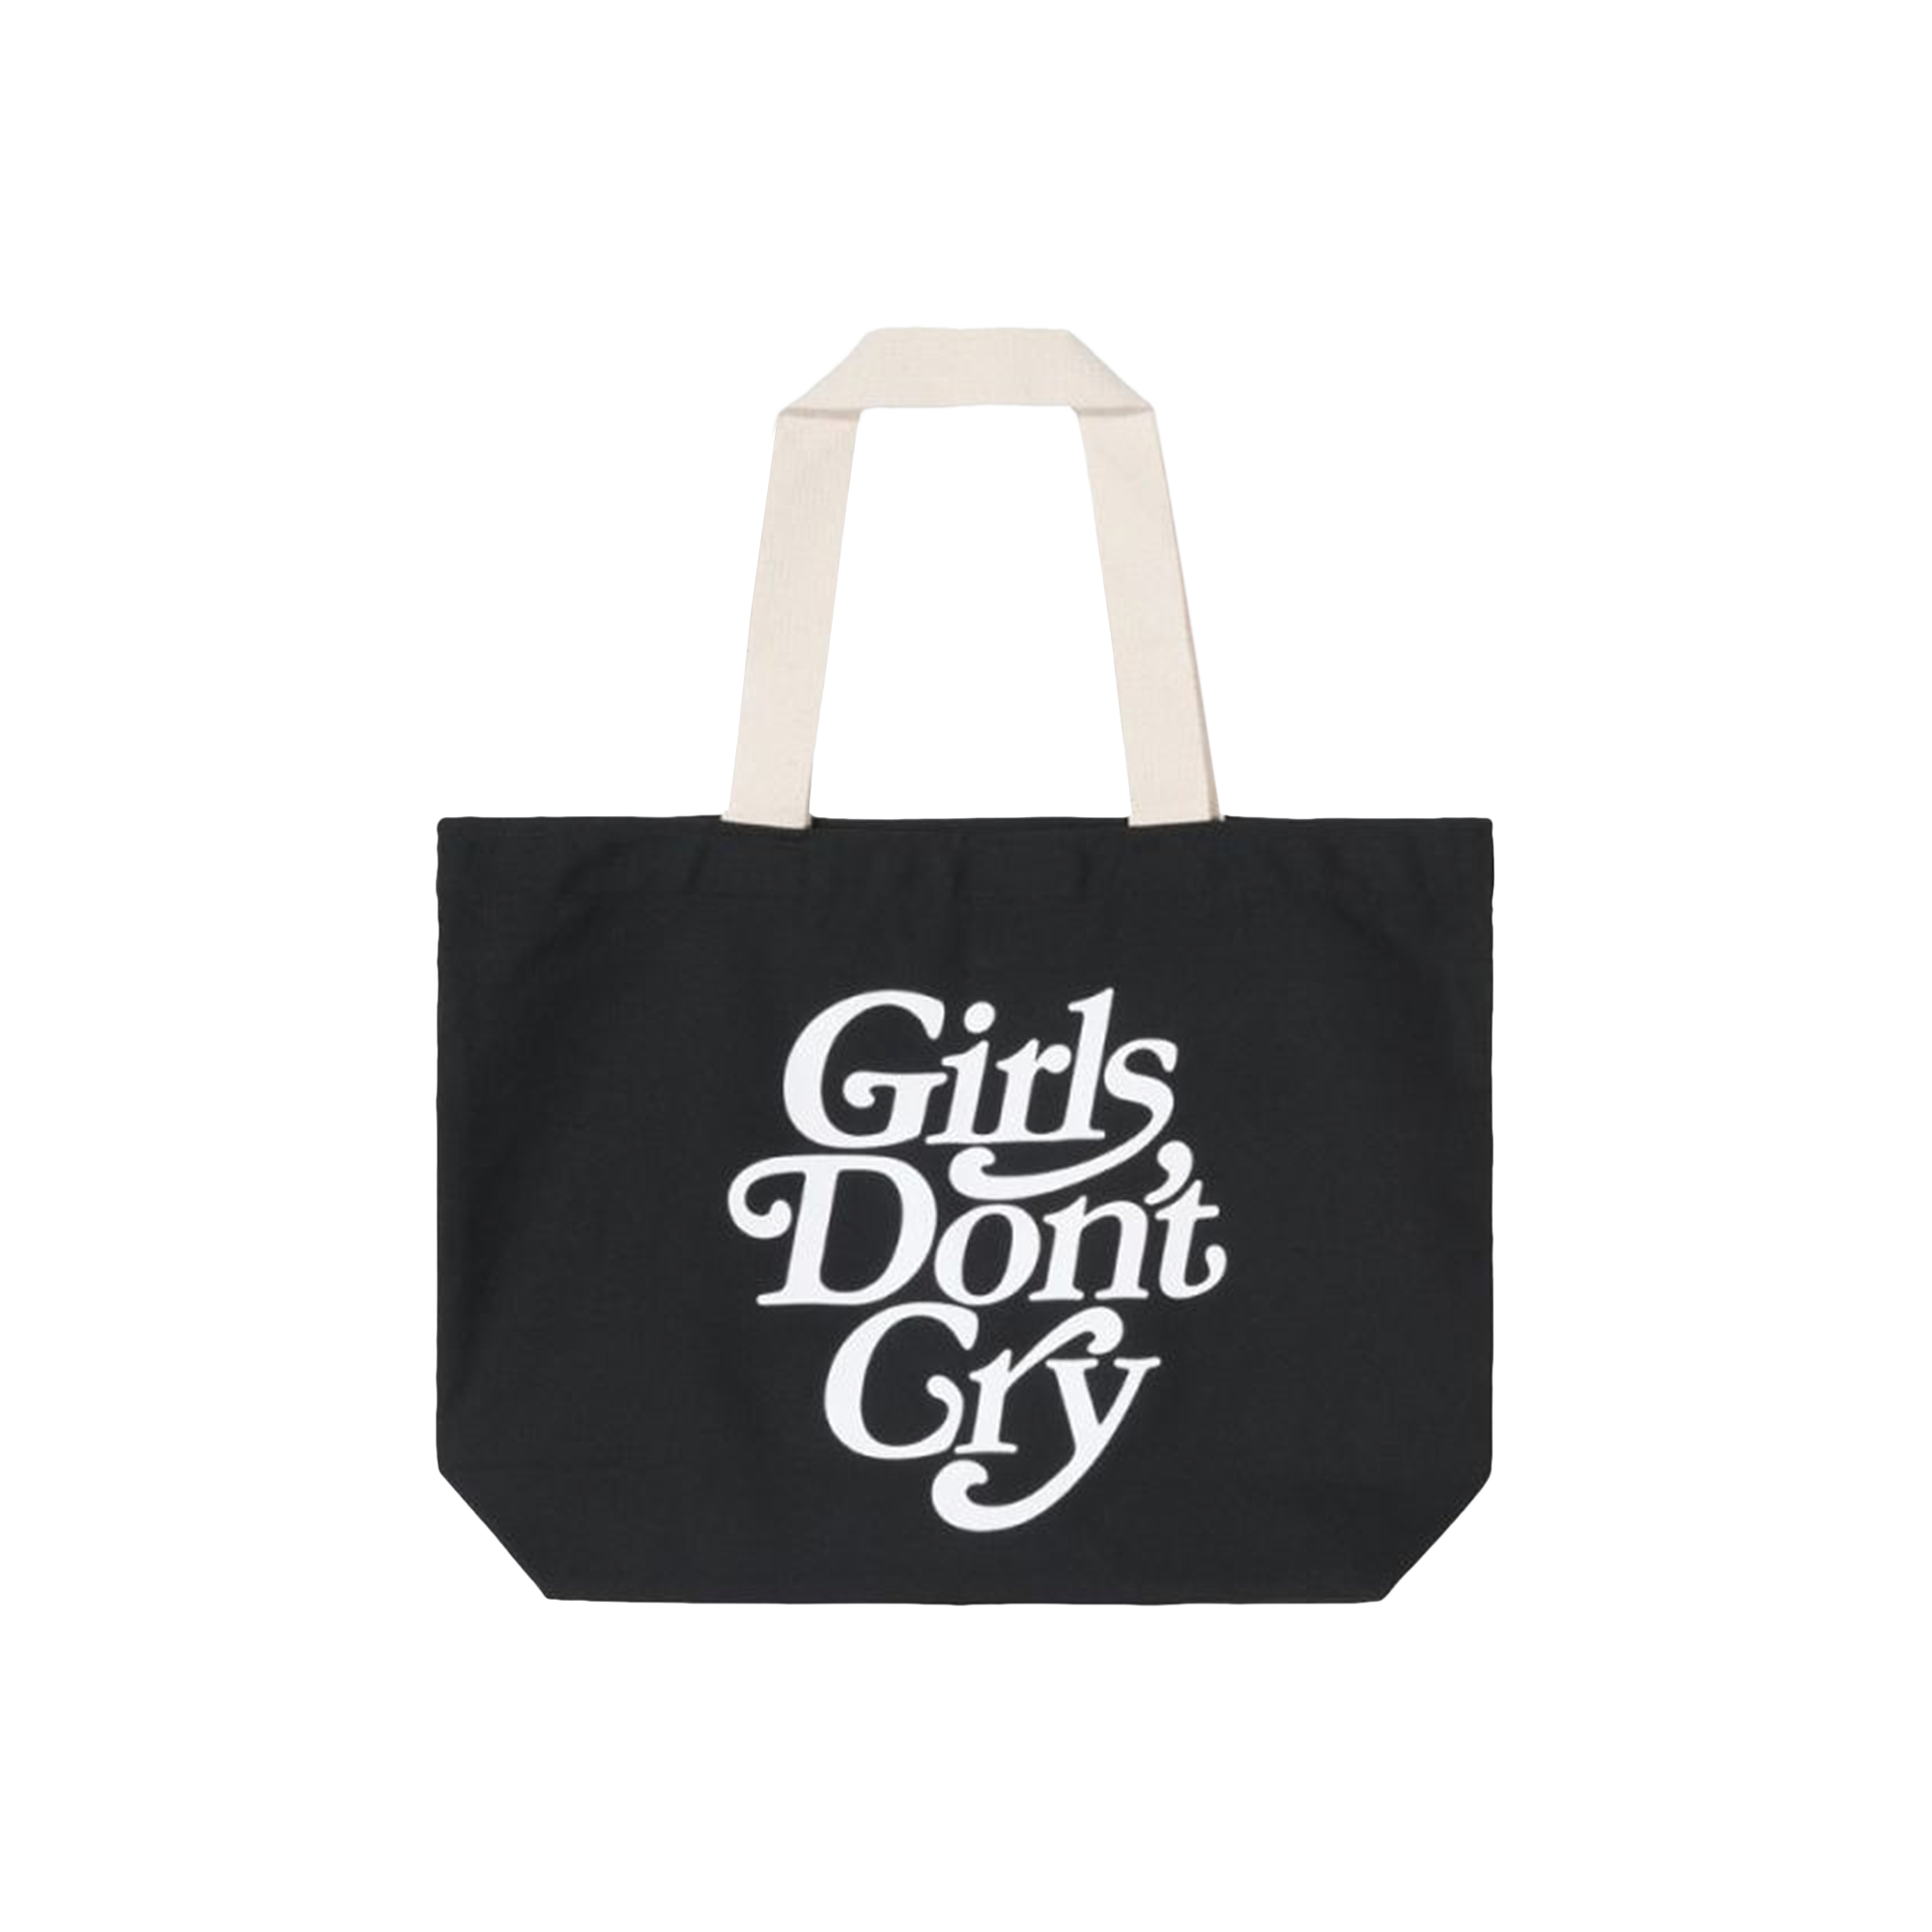 Buy Girls Dont Cry Bags: Tote Bags | GOAT